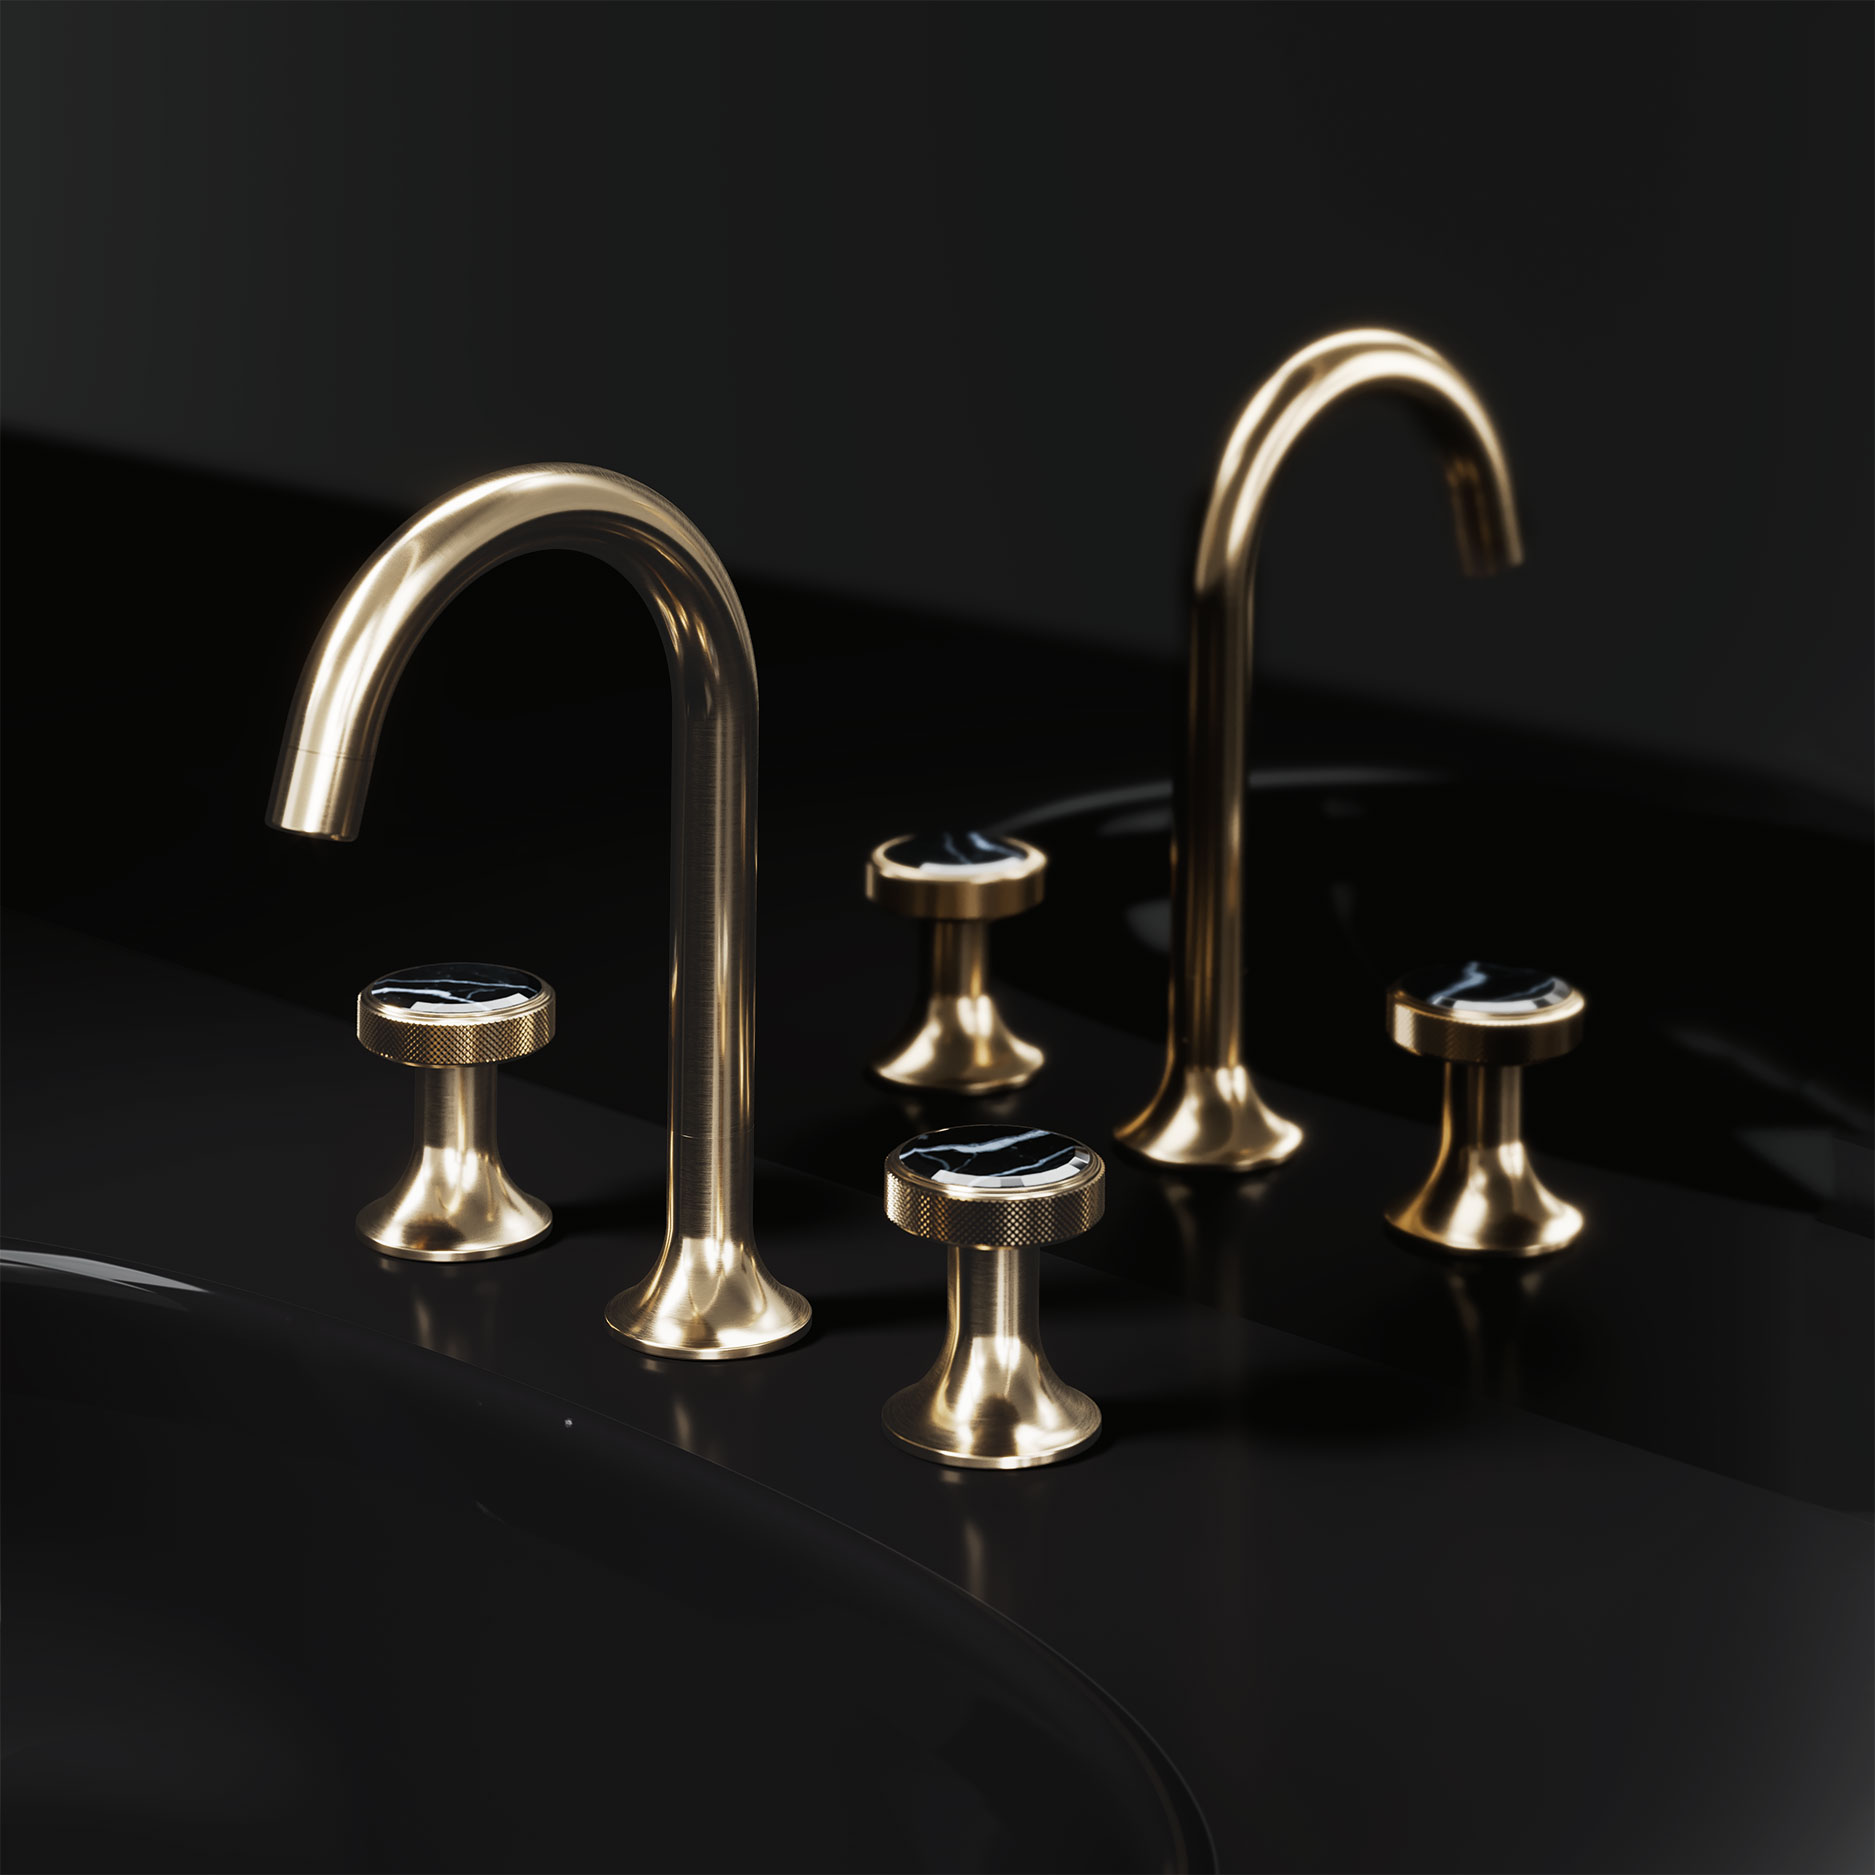 Luxury & Avant-garde – Exquisite Accessories Bathroom - glamorous and Fittings with shine Jörger moments